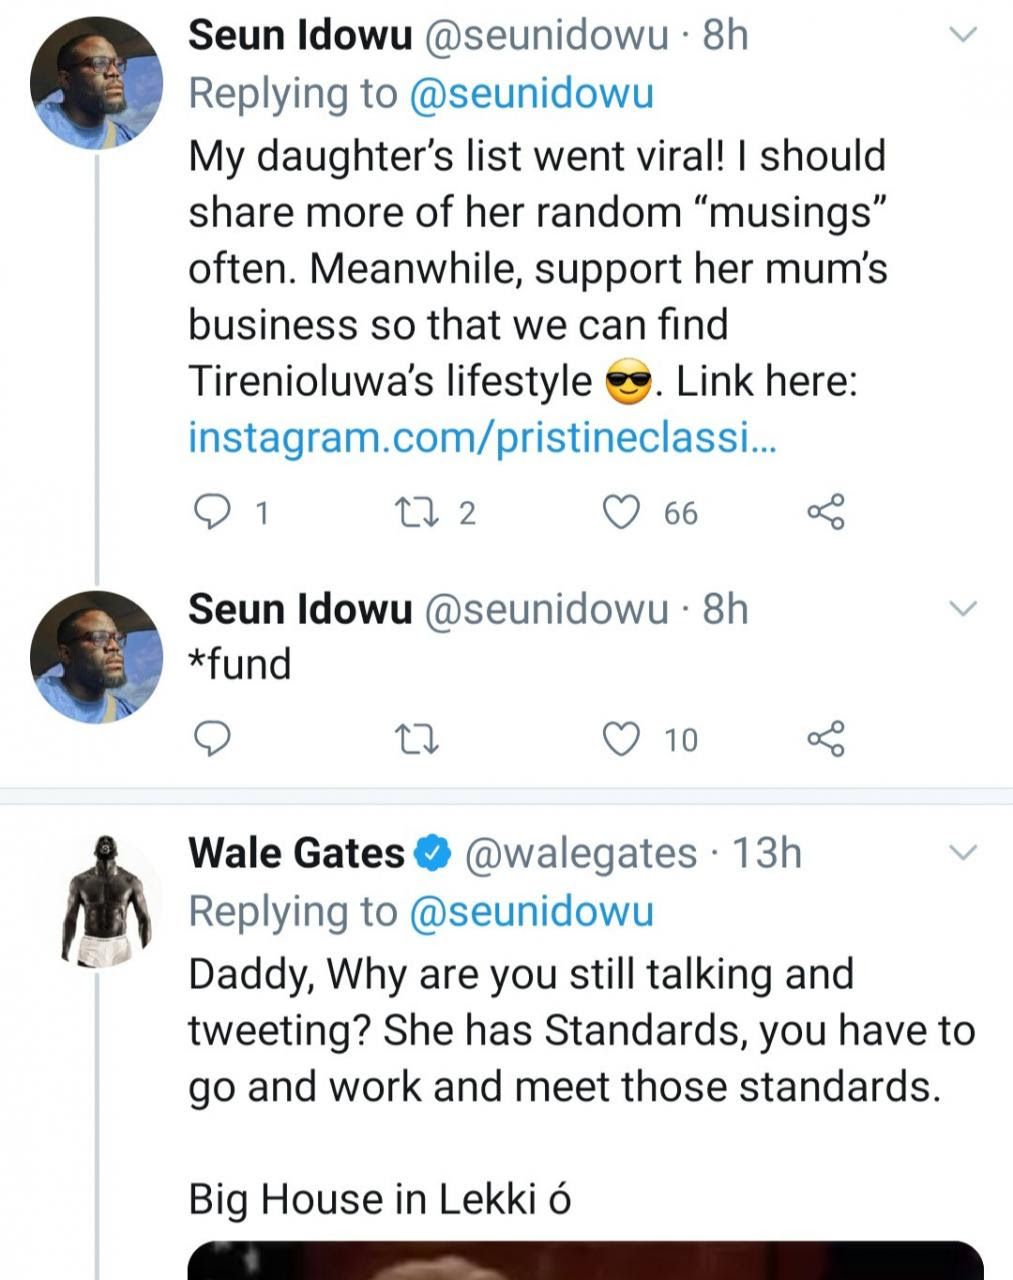 Nigerian father shares his daughter